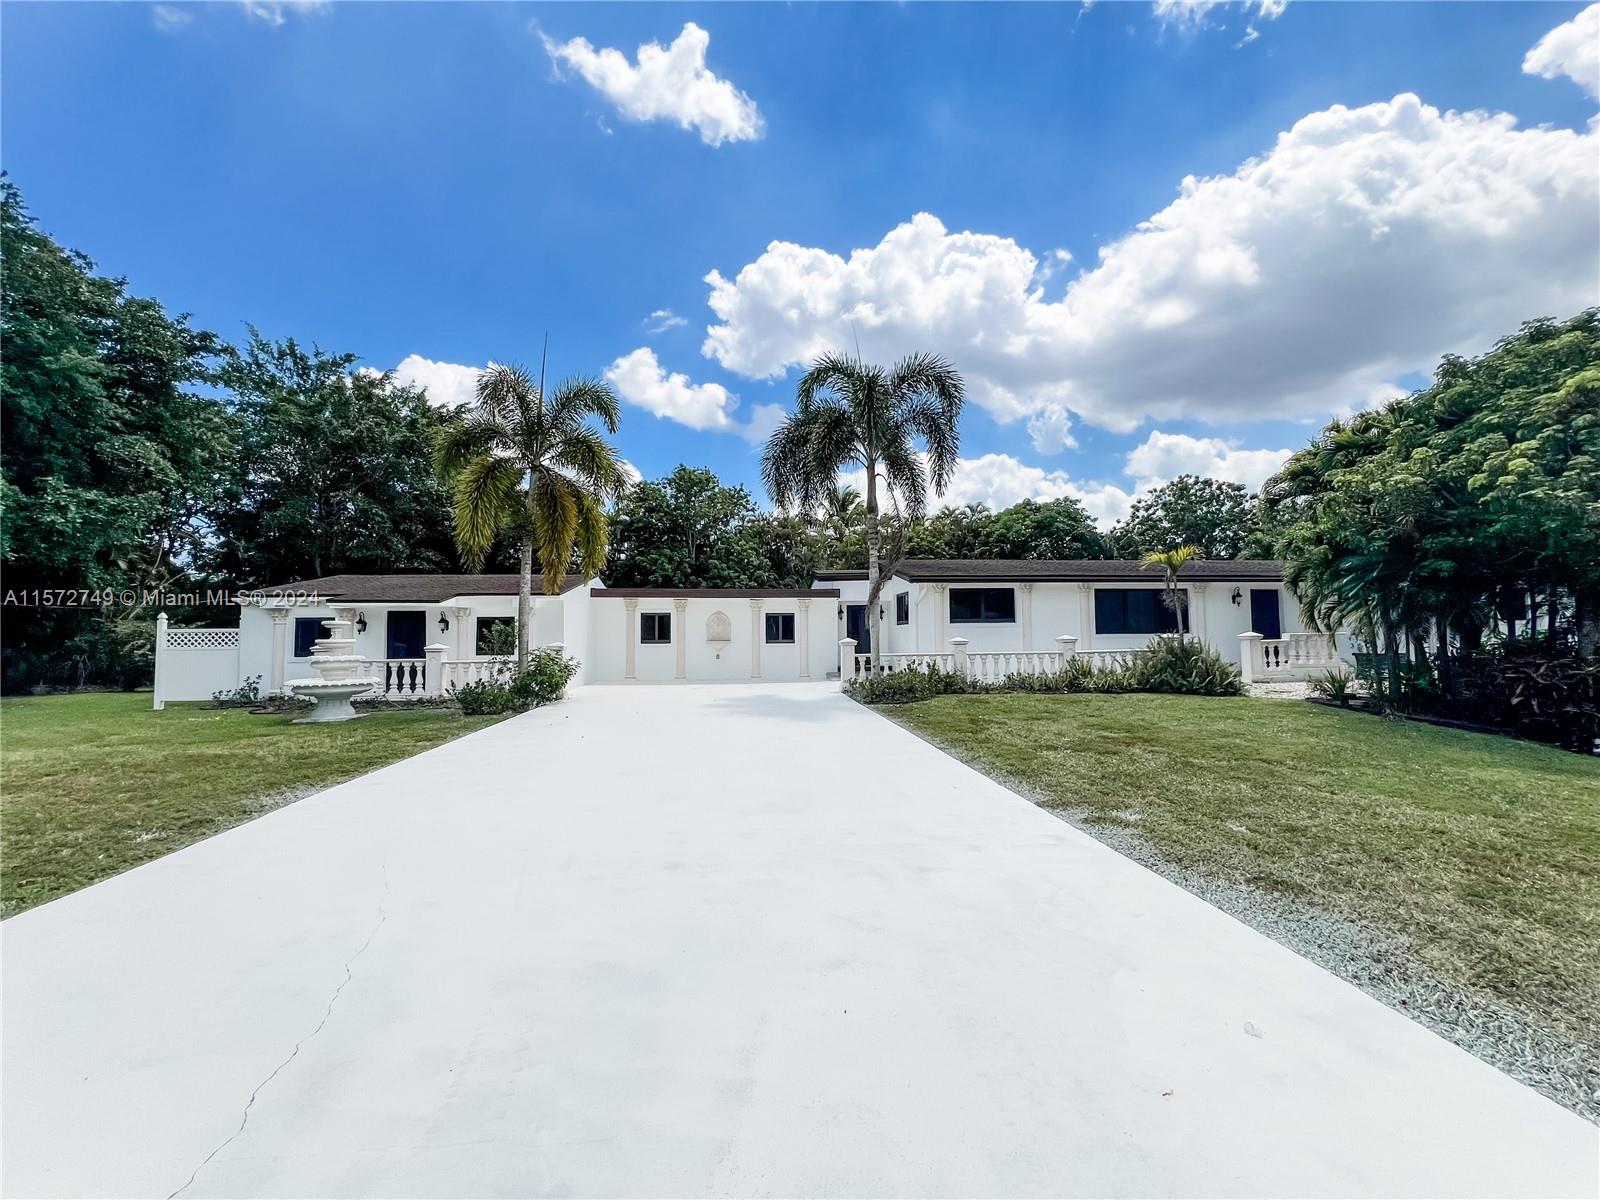 12200 NW 20th Ct, Plantation, Florida 33323, 4 Bedrooms Bedrooms, ,3 BathroomsBathrooms,Residential,For Sale,12200 NW 20th Ct,A11572749